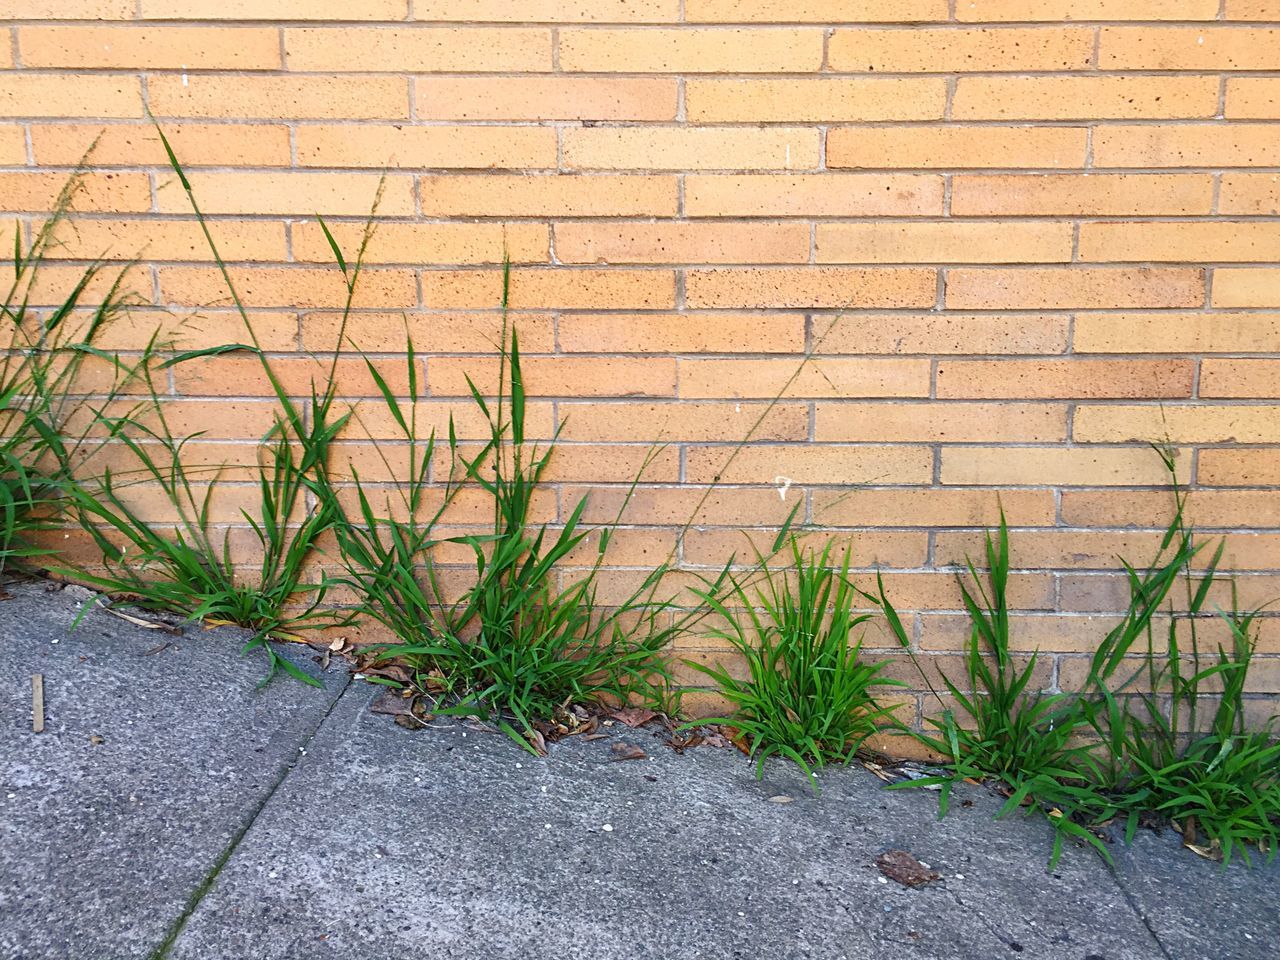 Grass in the cracks